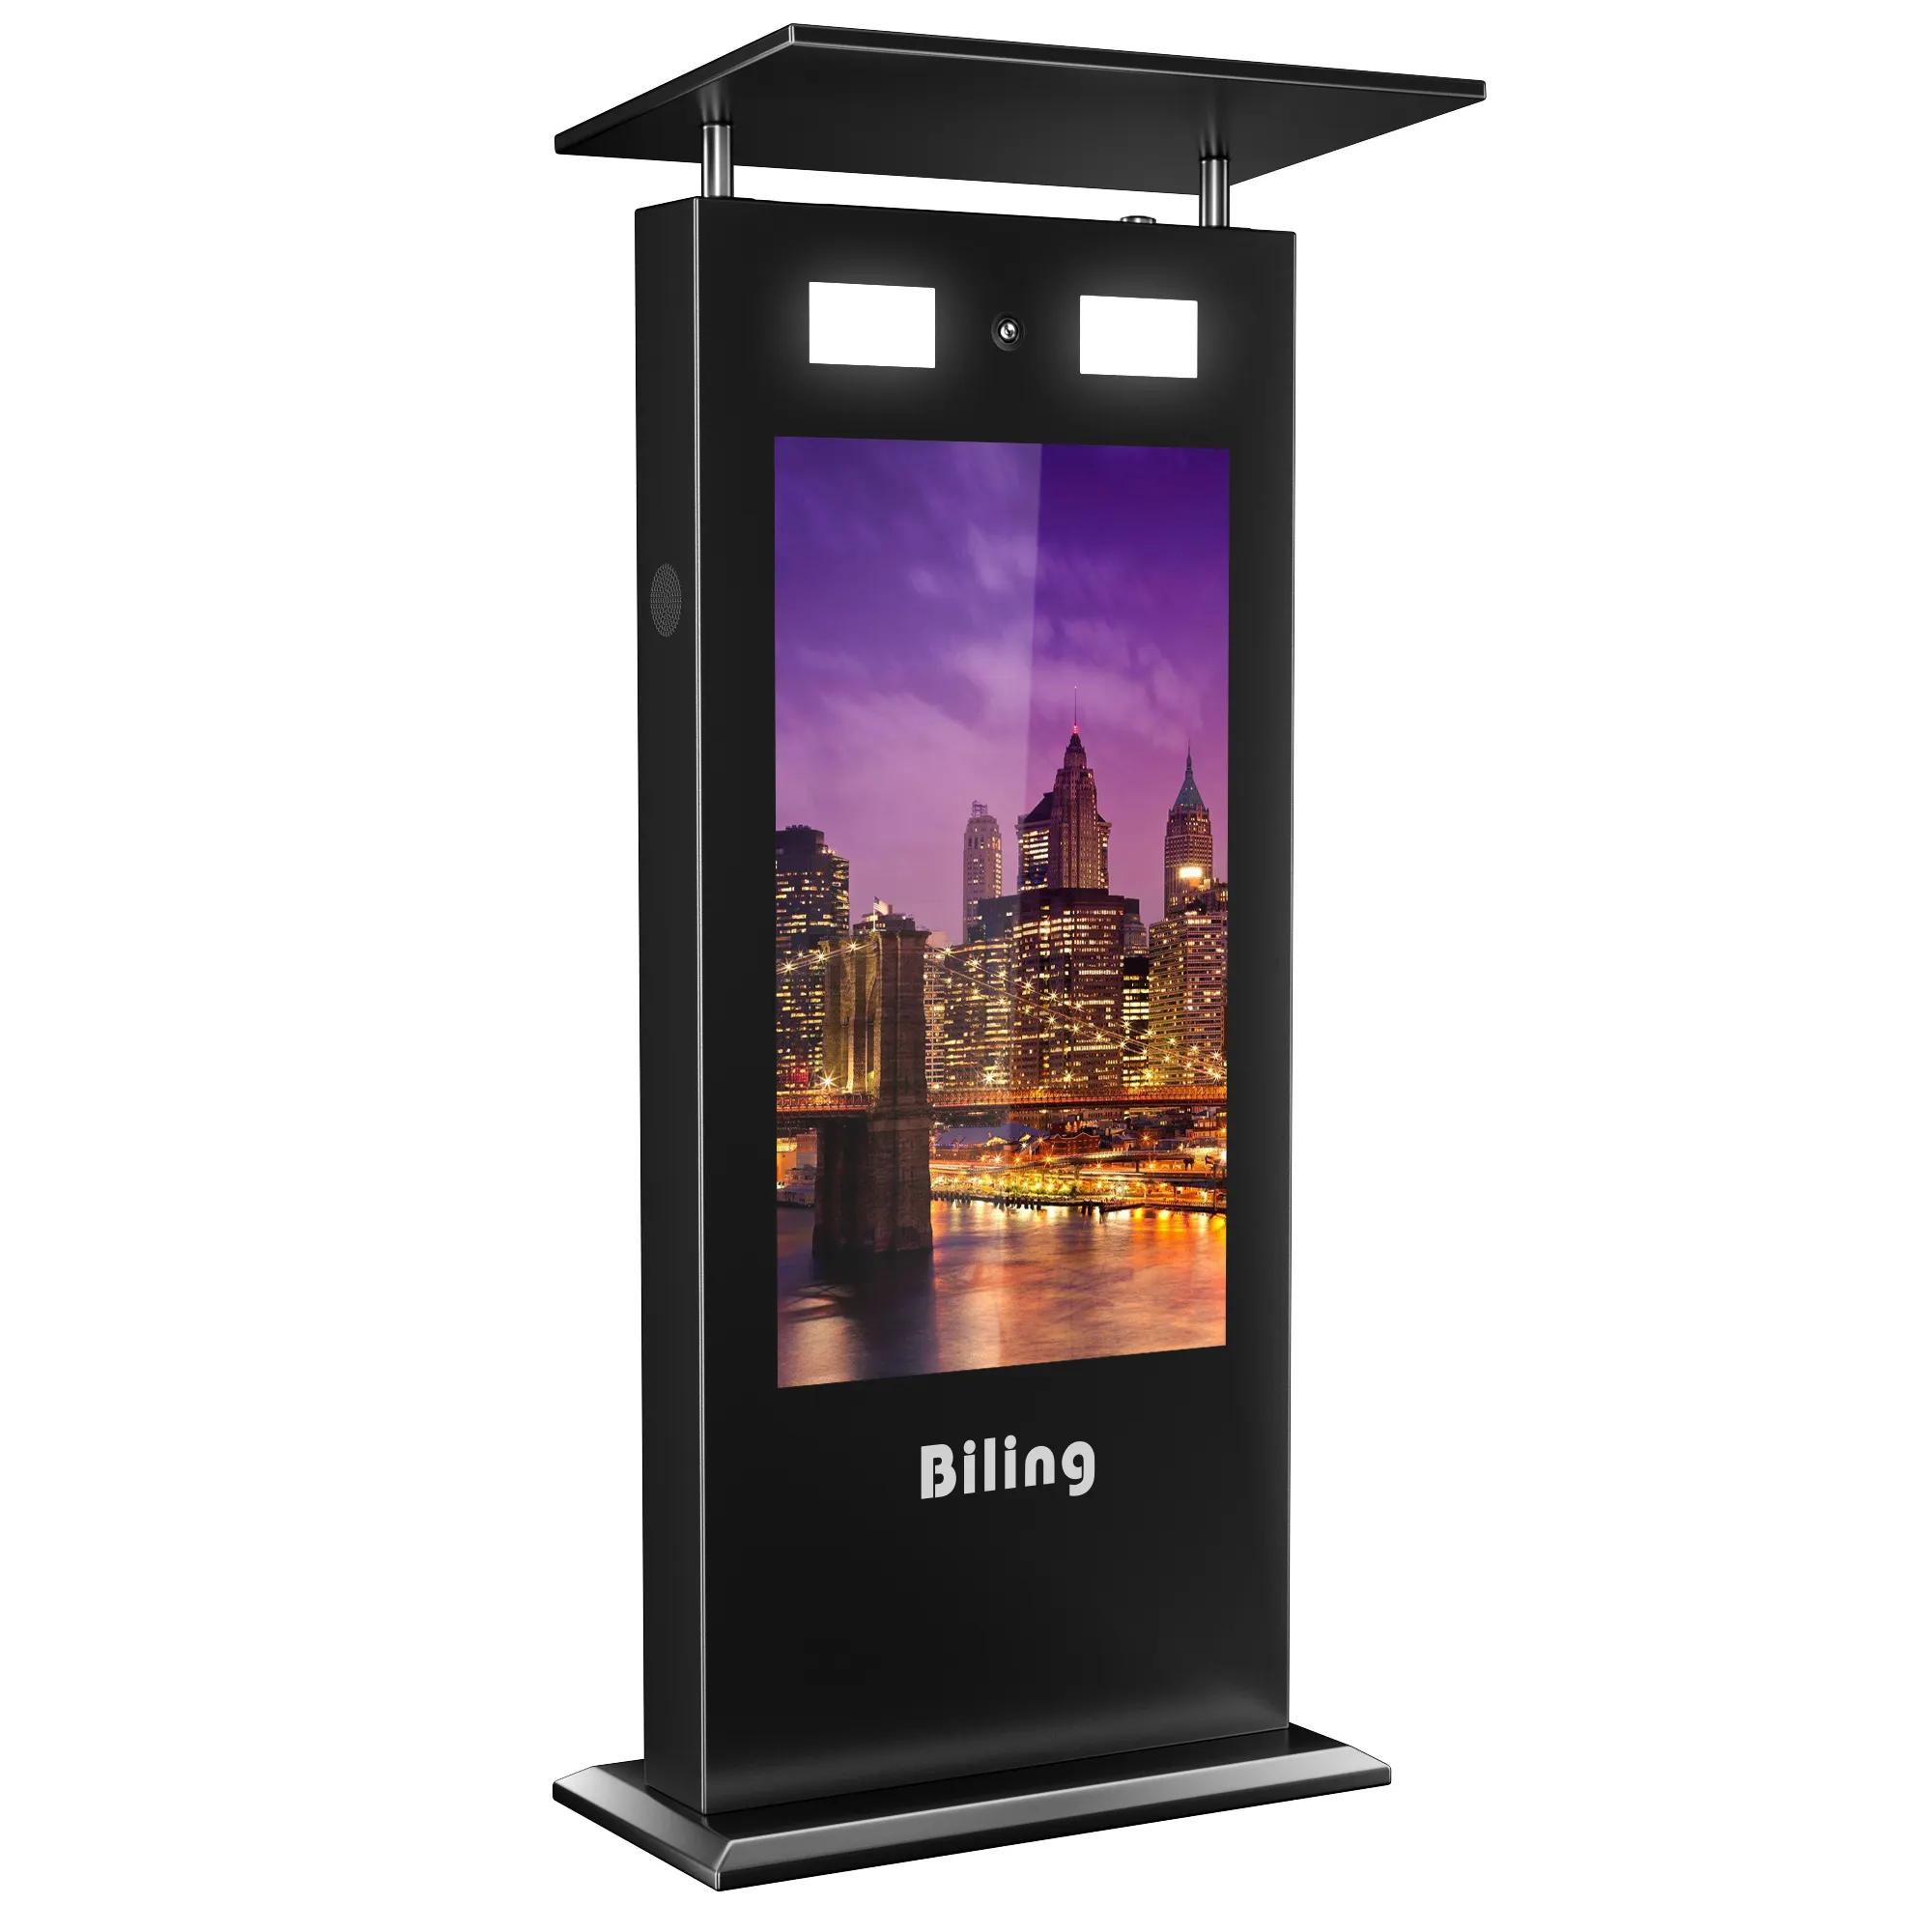 24 inch Intelligent Outdoor Advertising Machine for Gate wifi network ad display roof-fixing player digital display signage